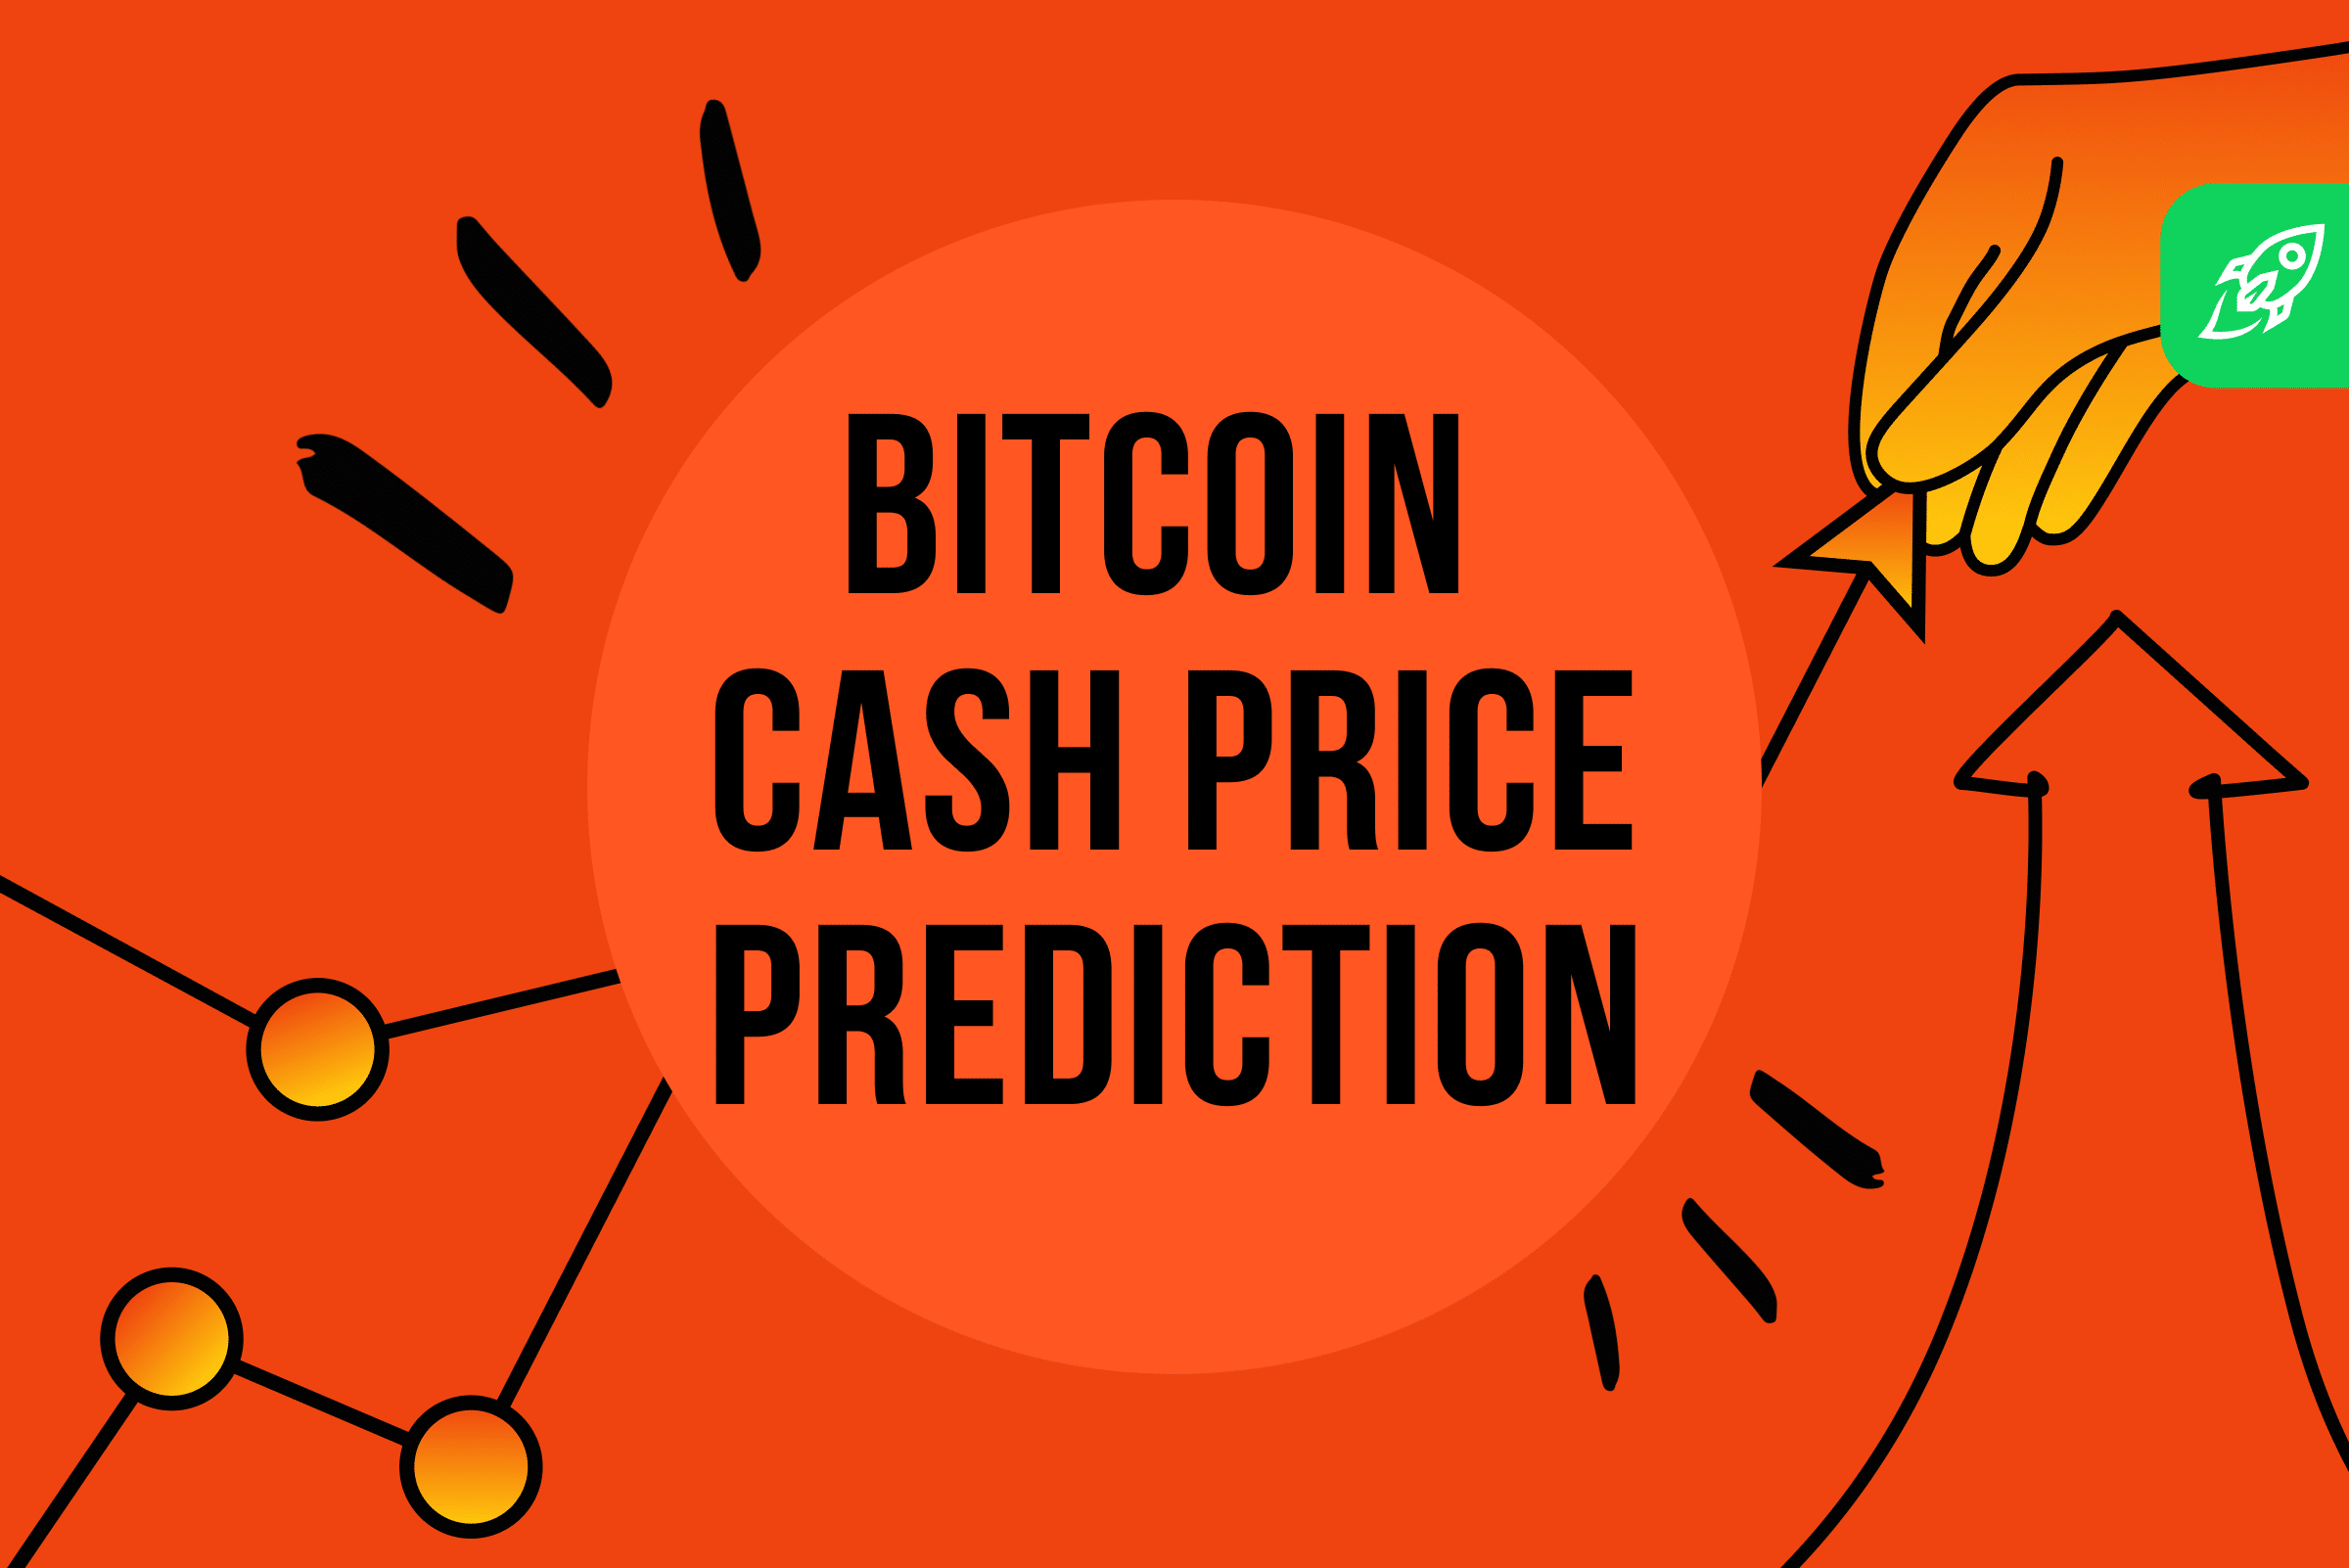 Bitcoin Cash is Predicted to Reach $ By Mar 09, | CoinCodex